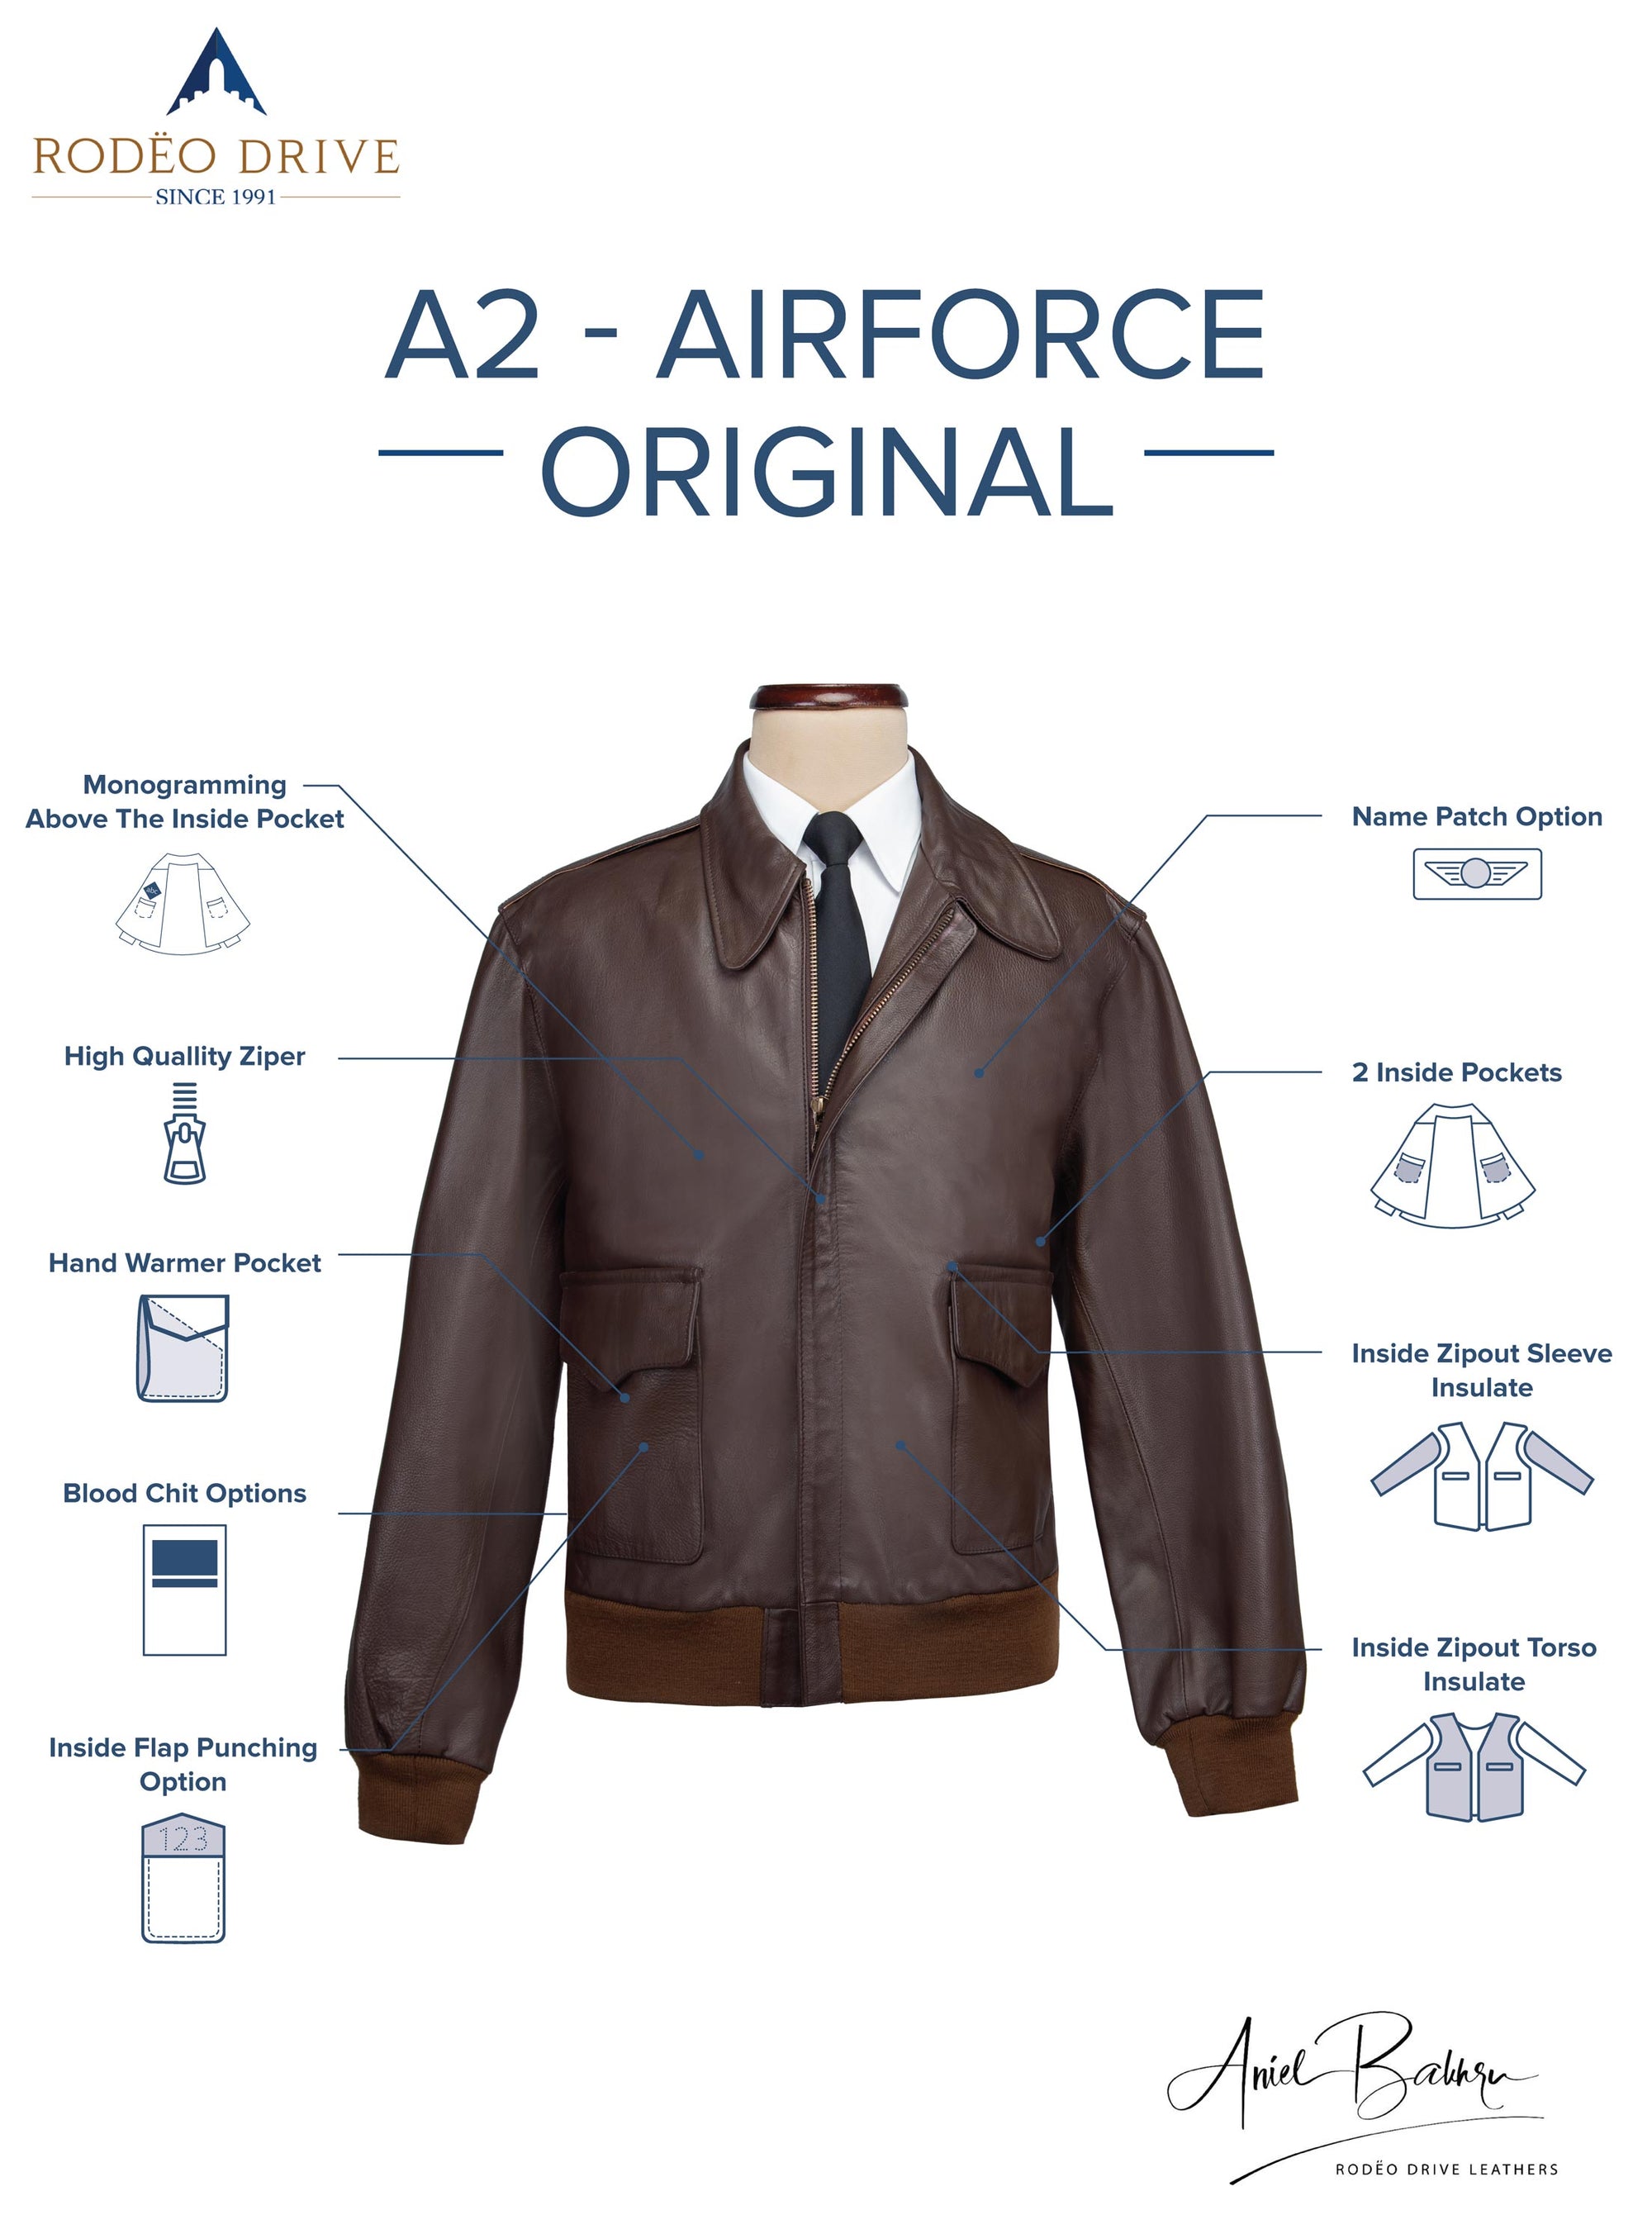 Image of complete anatomy of AIRFORCE BOMBER JACKET